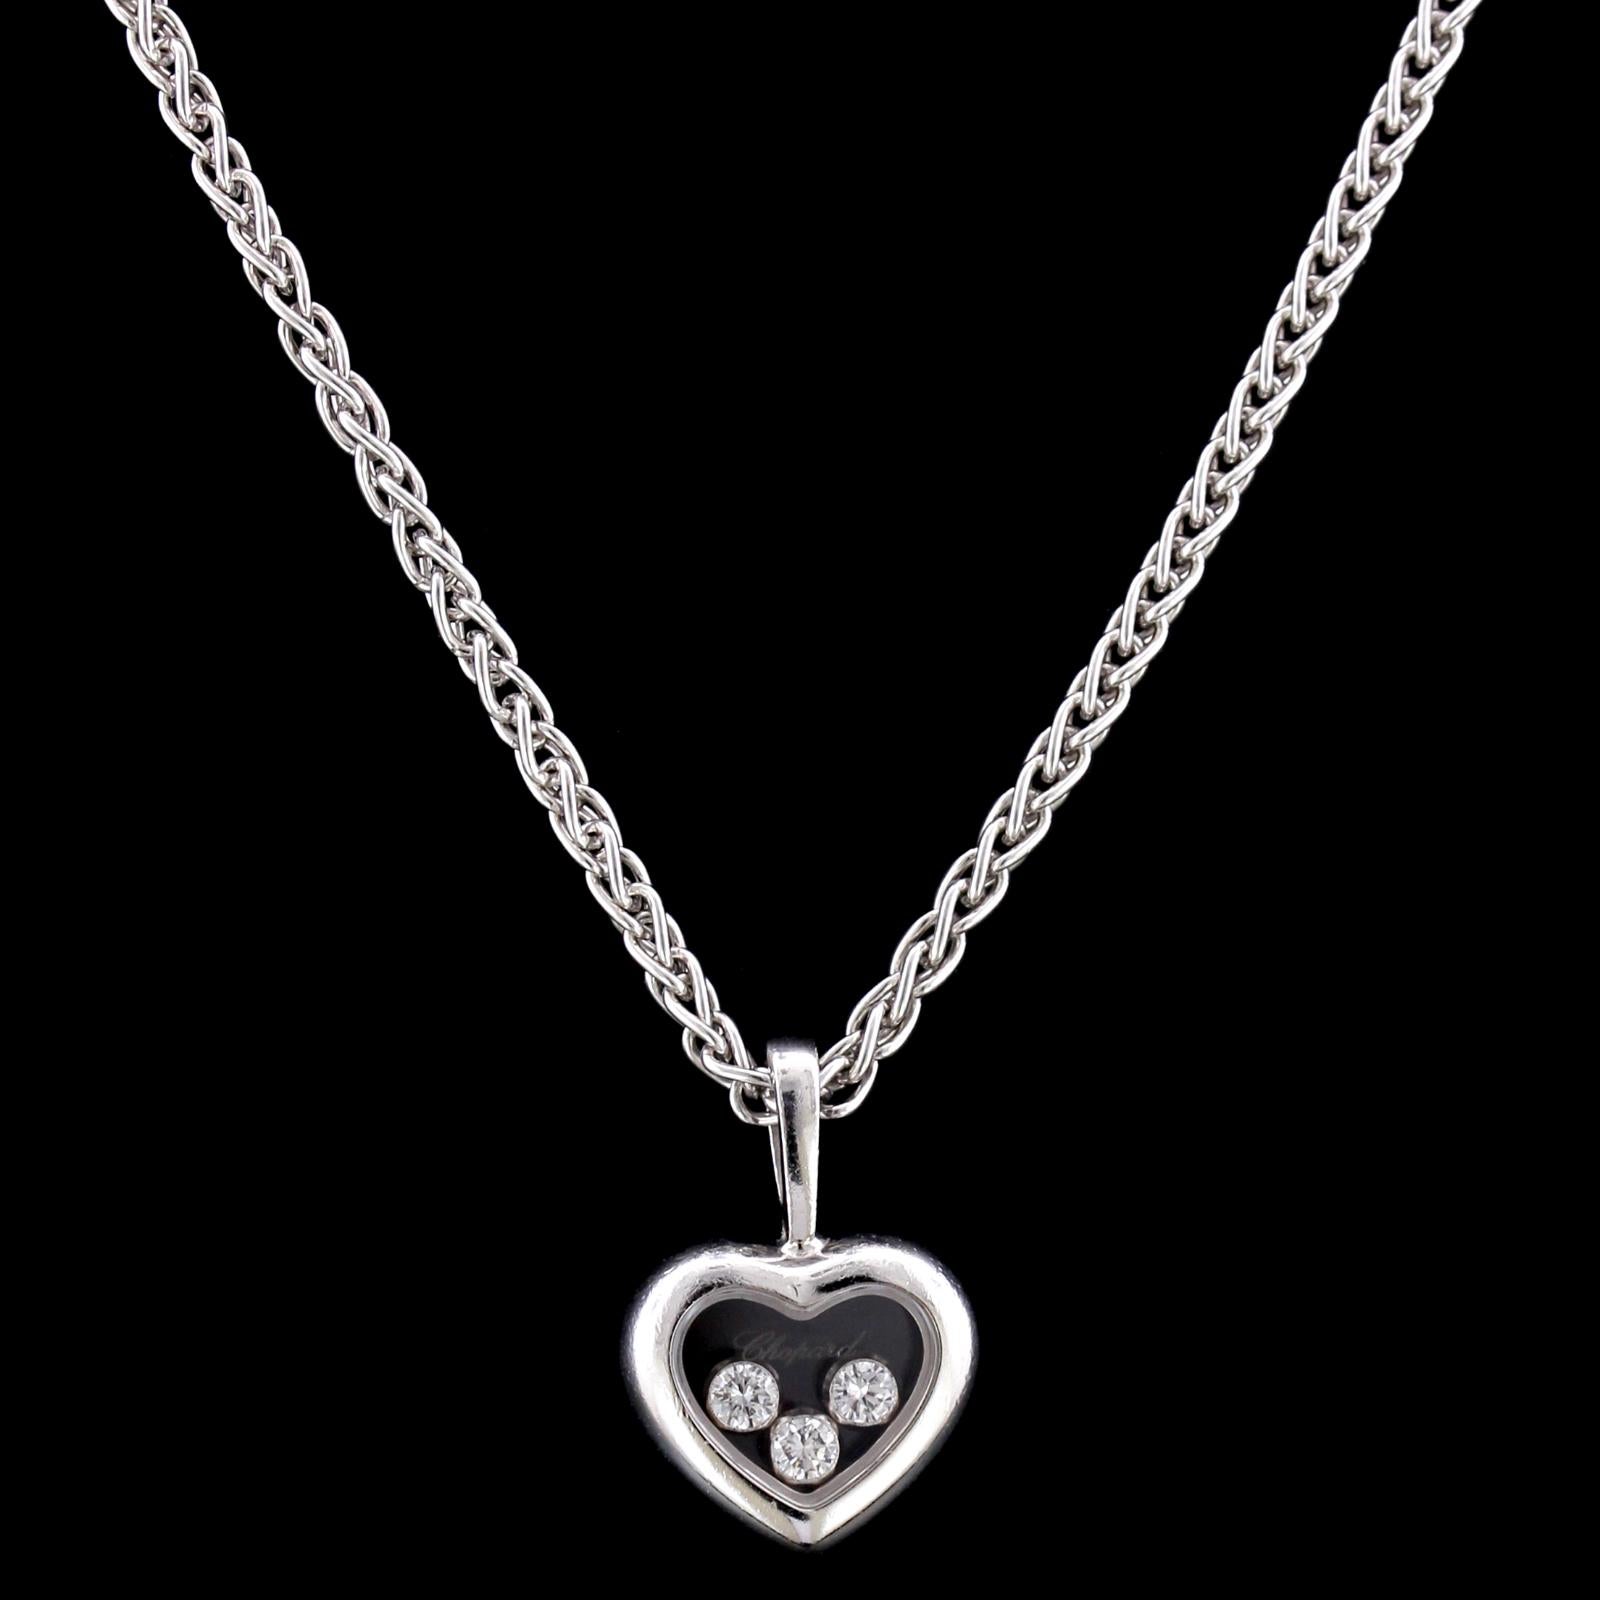 Chopard 18K White Gold Happy Diamond Heart Pendant. The heart encloses three floating diamonds, approx. total wt. .17cts., suspended from a 16